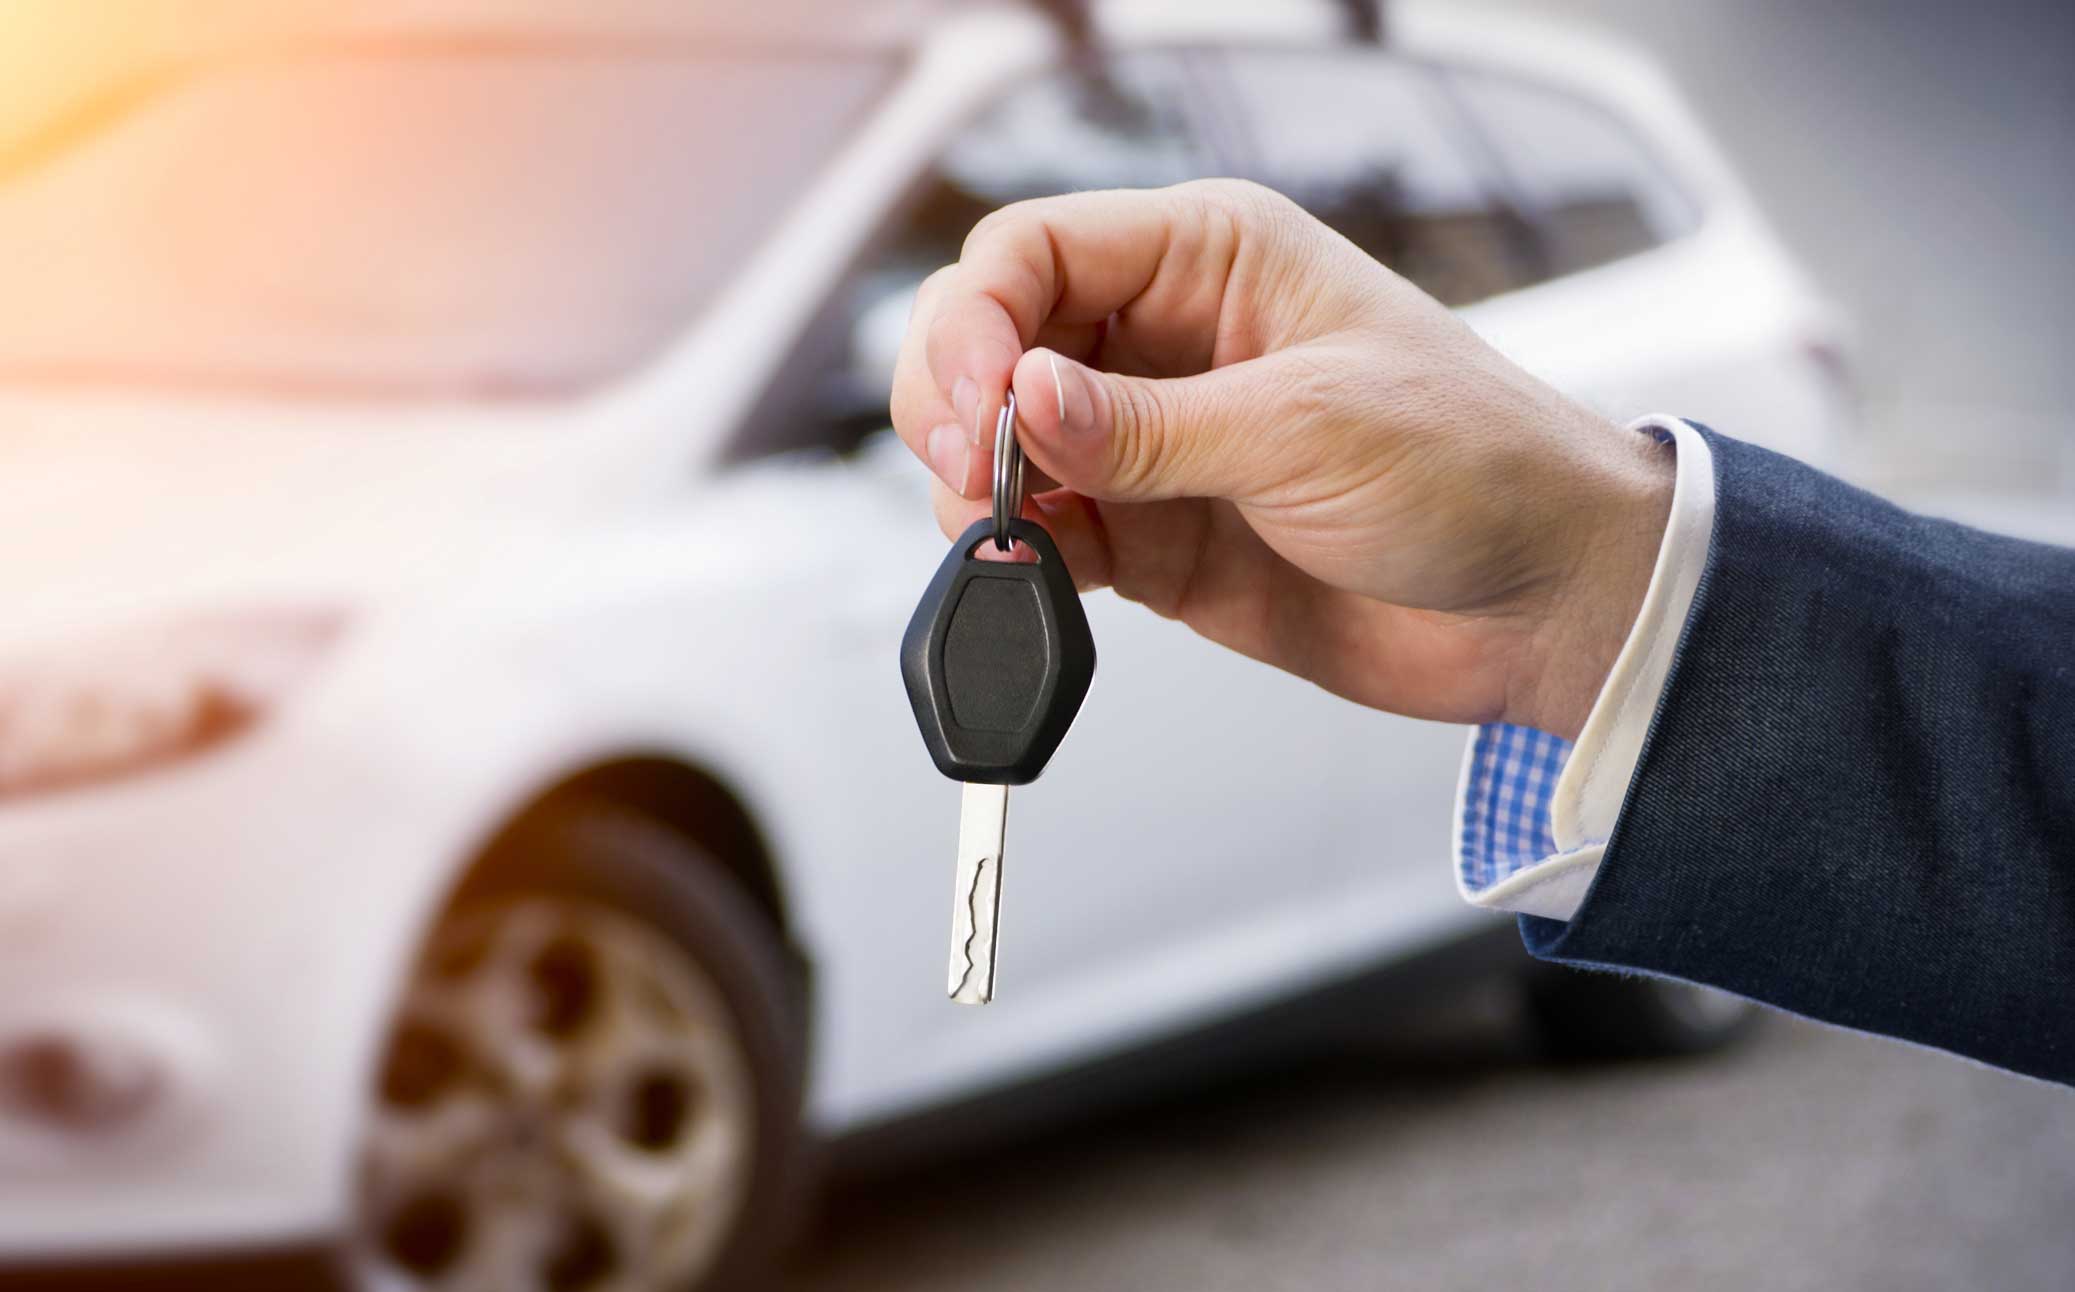 Rental Car Checklist: 16 Tips to Avoid Scams